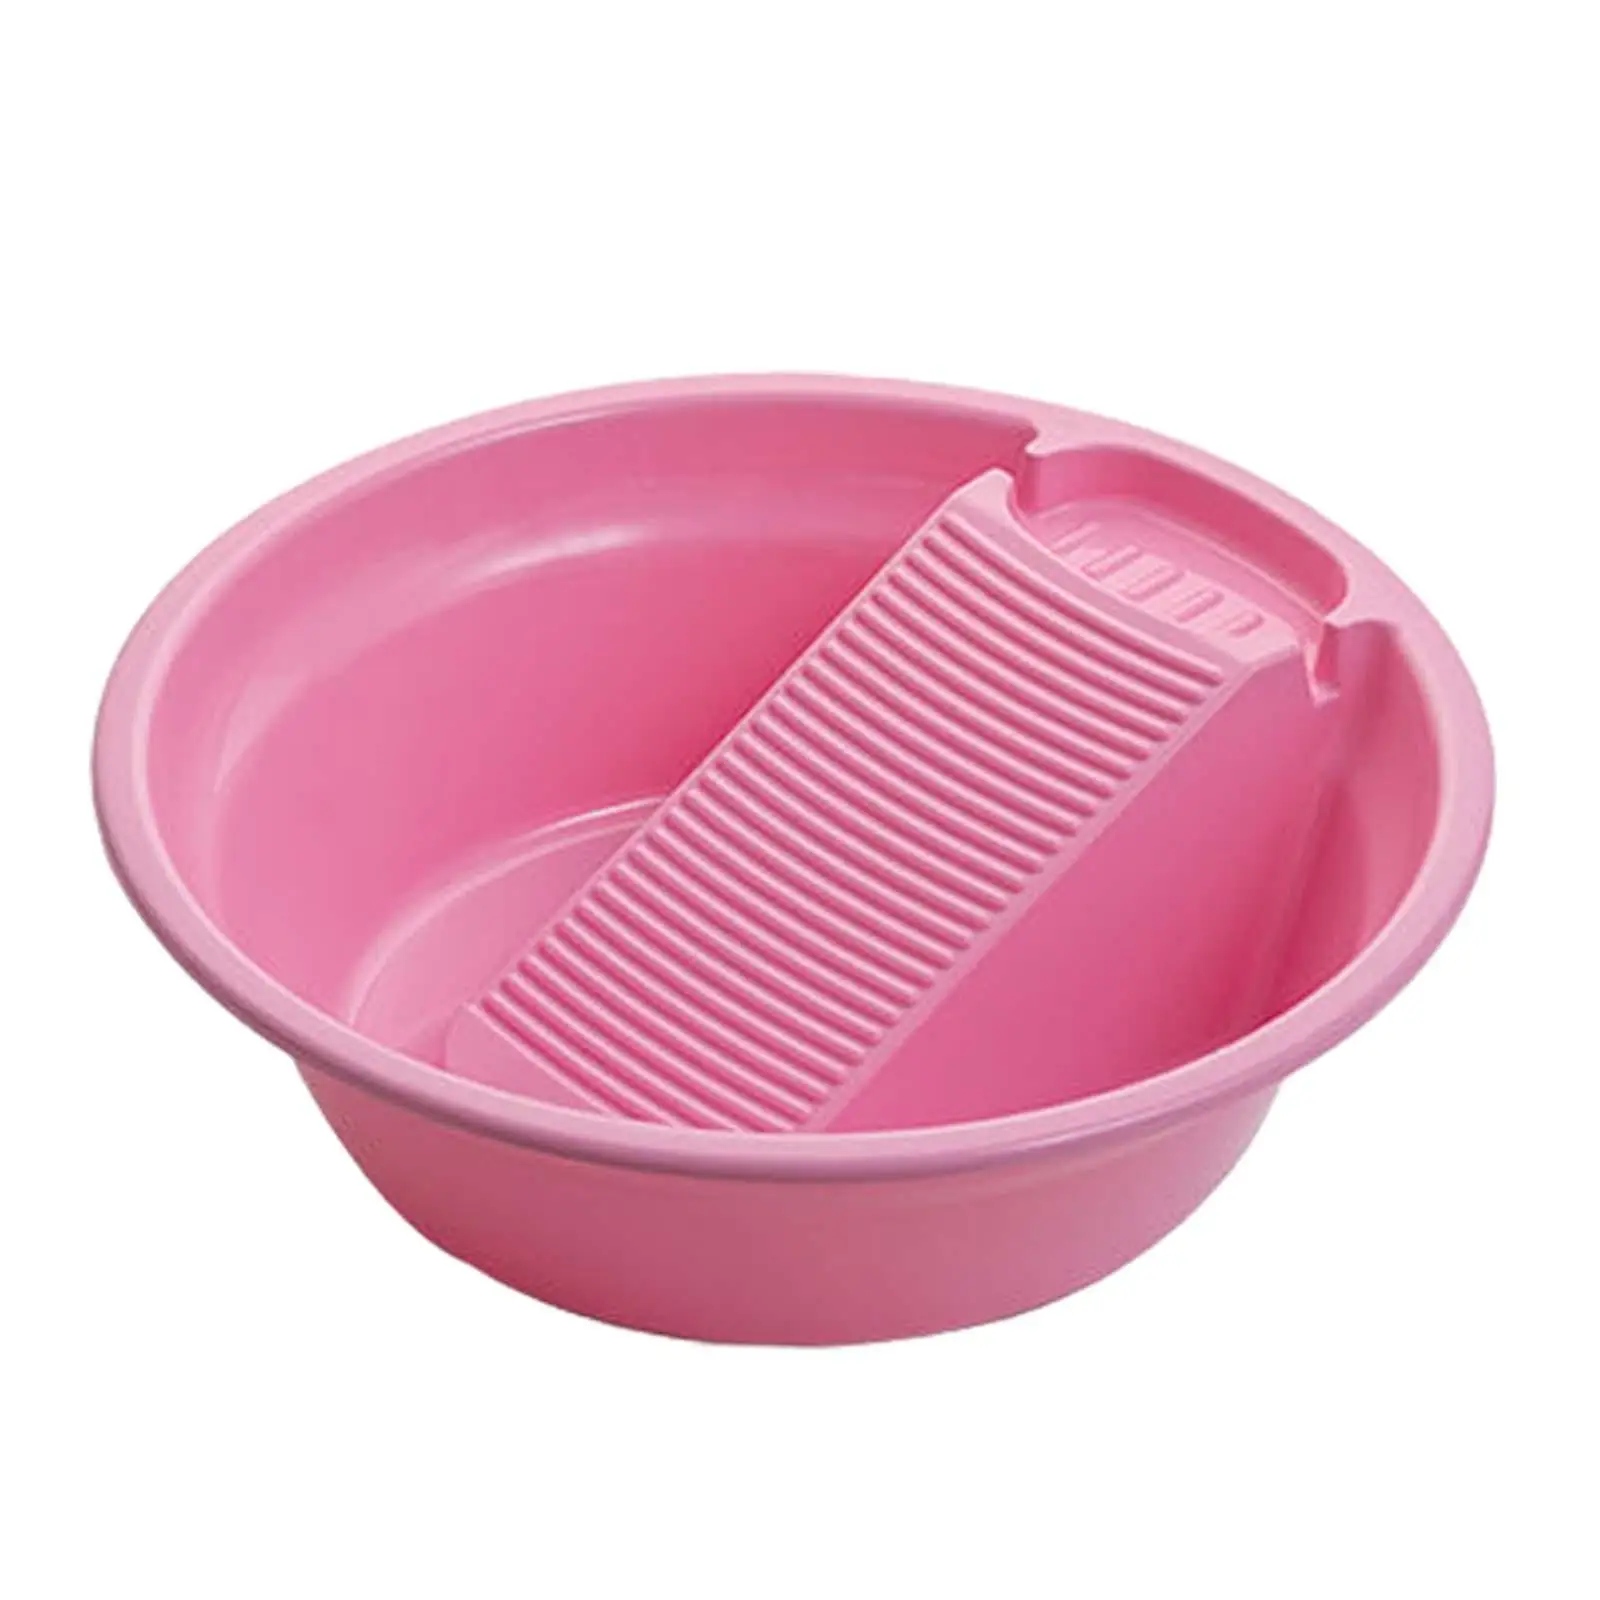 Washboard Basin Thickened Non Slip Basin for Laundry Washtub with Washboard Integrated for T Shirts Clothes Travel Pants Blouses